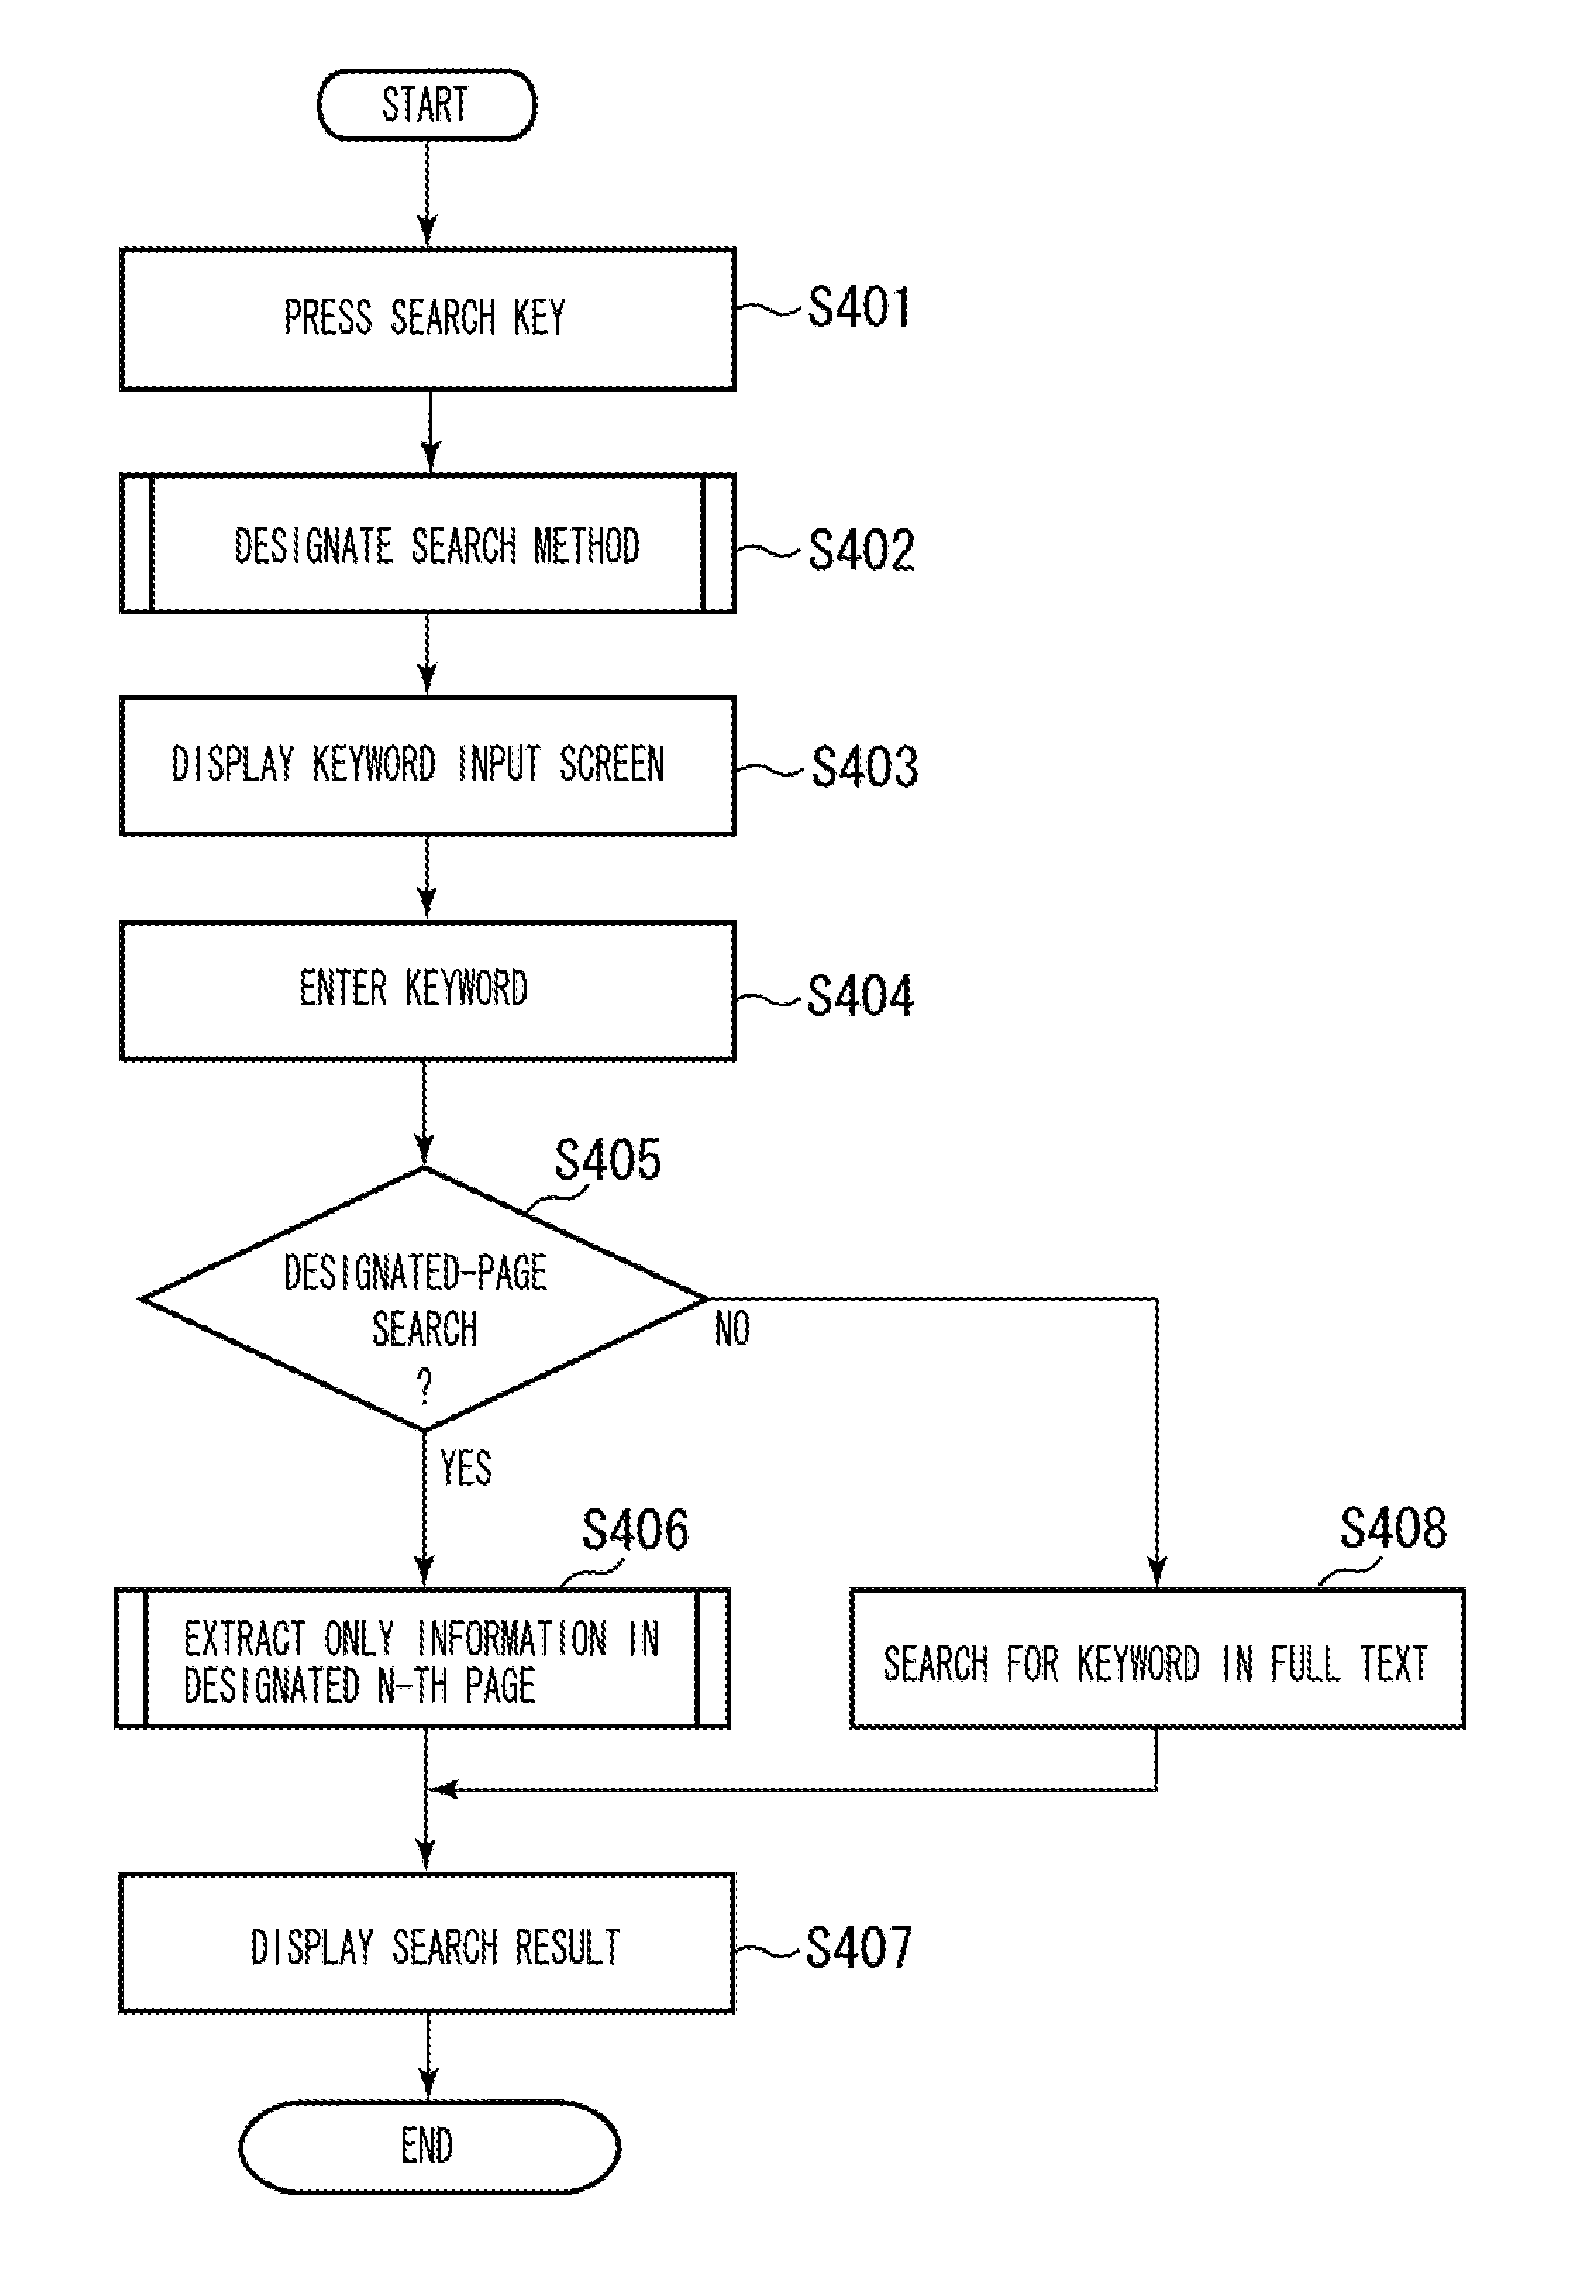 Image processing apparatus and method for controlling image processing apparatus